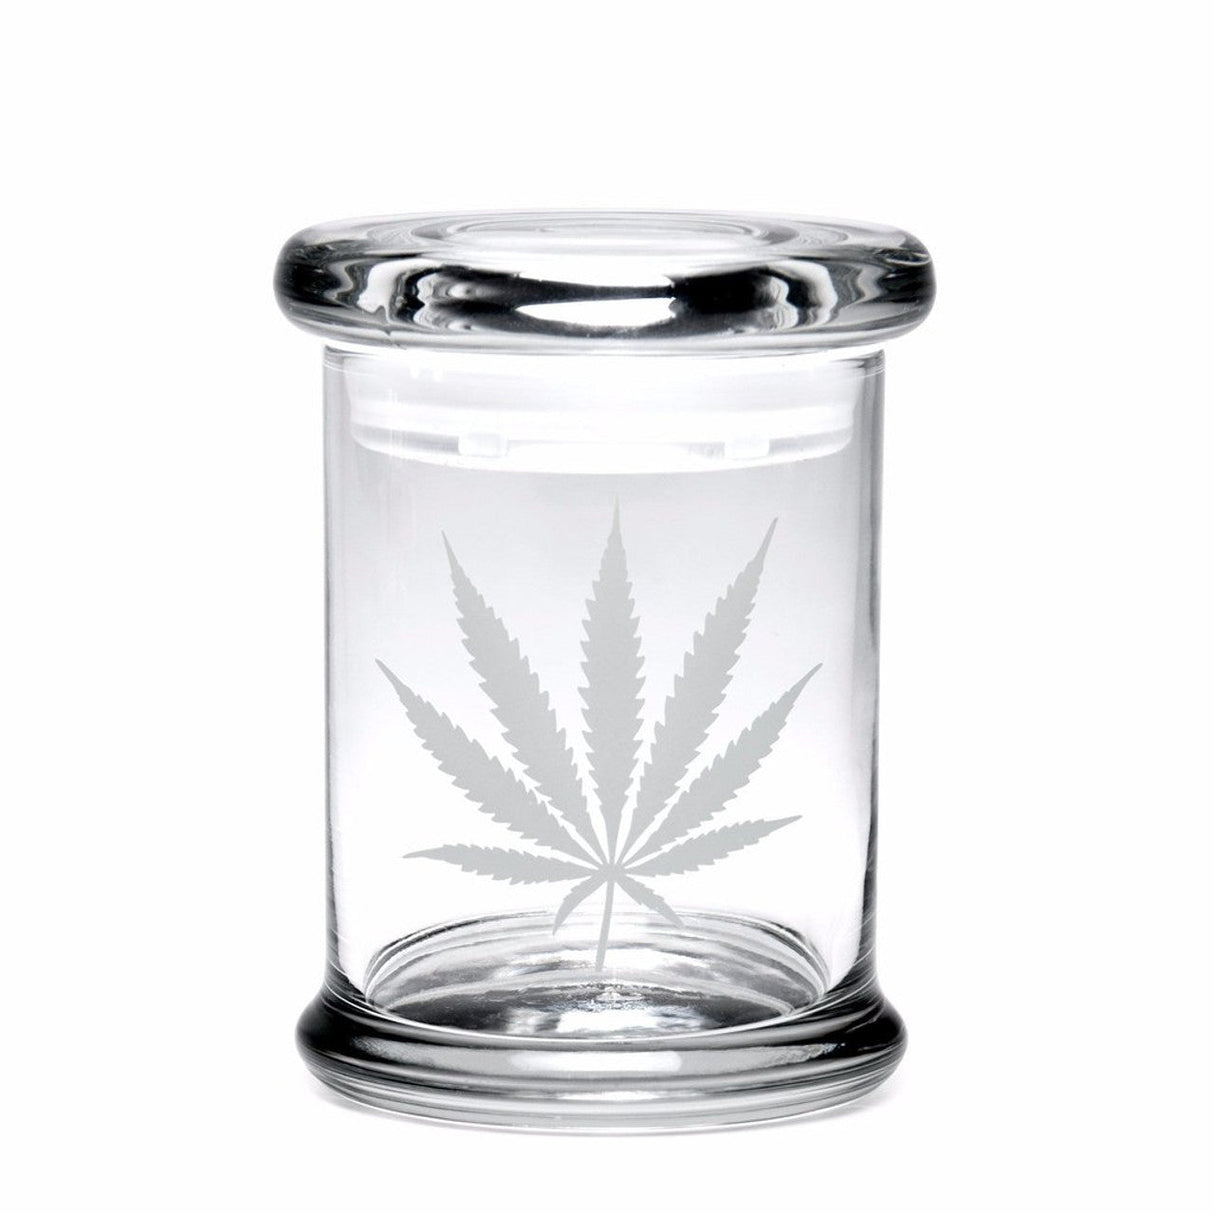 420 Science Pop-Top Jar with Silver Leaf Design, Clear Borosilicate Glass, Front View